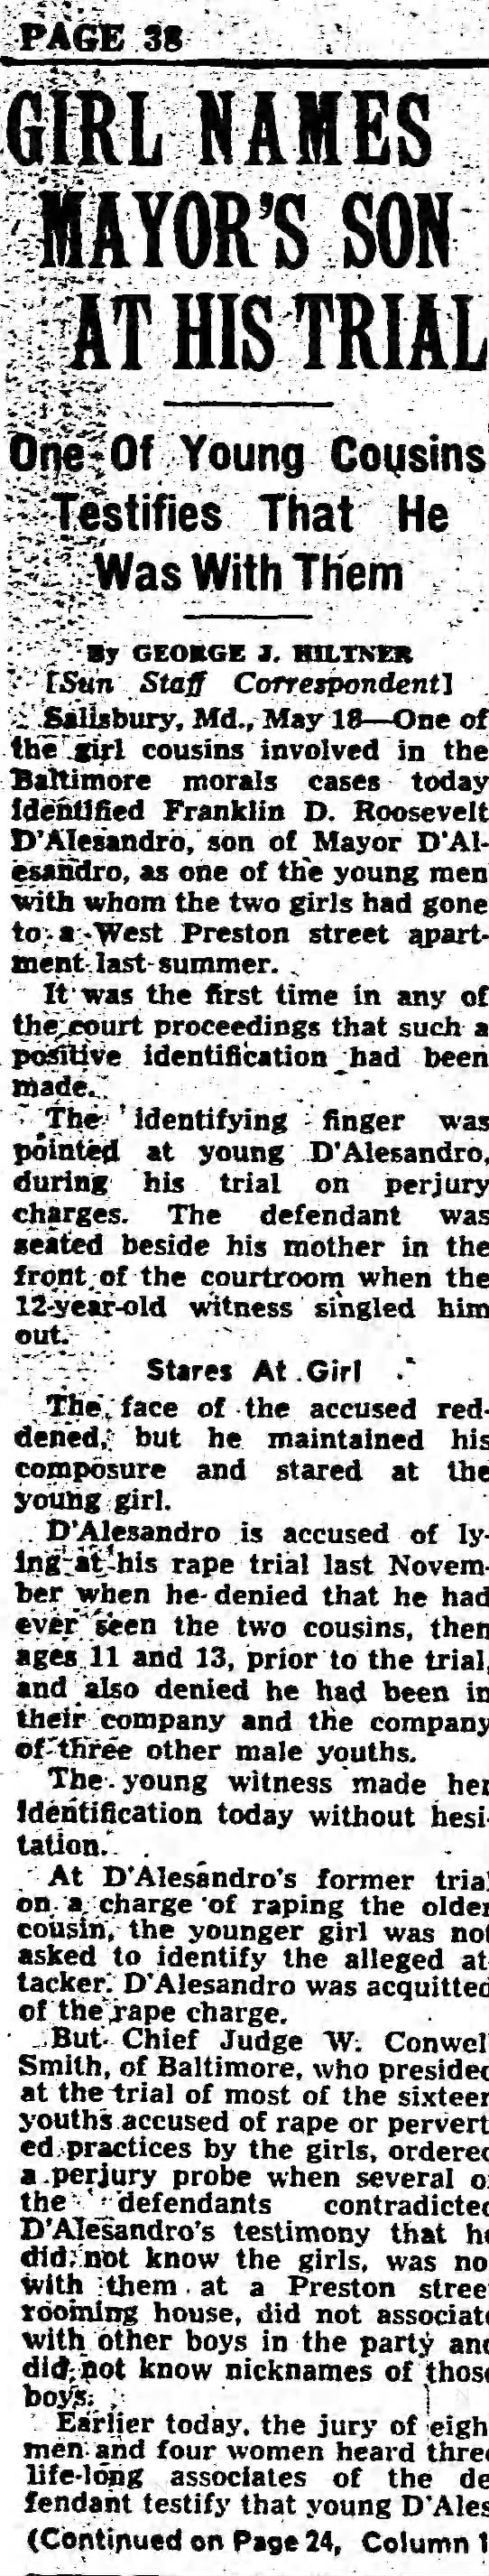 12 year old girl identifies D'Alessandro at perjury trial